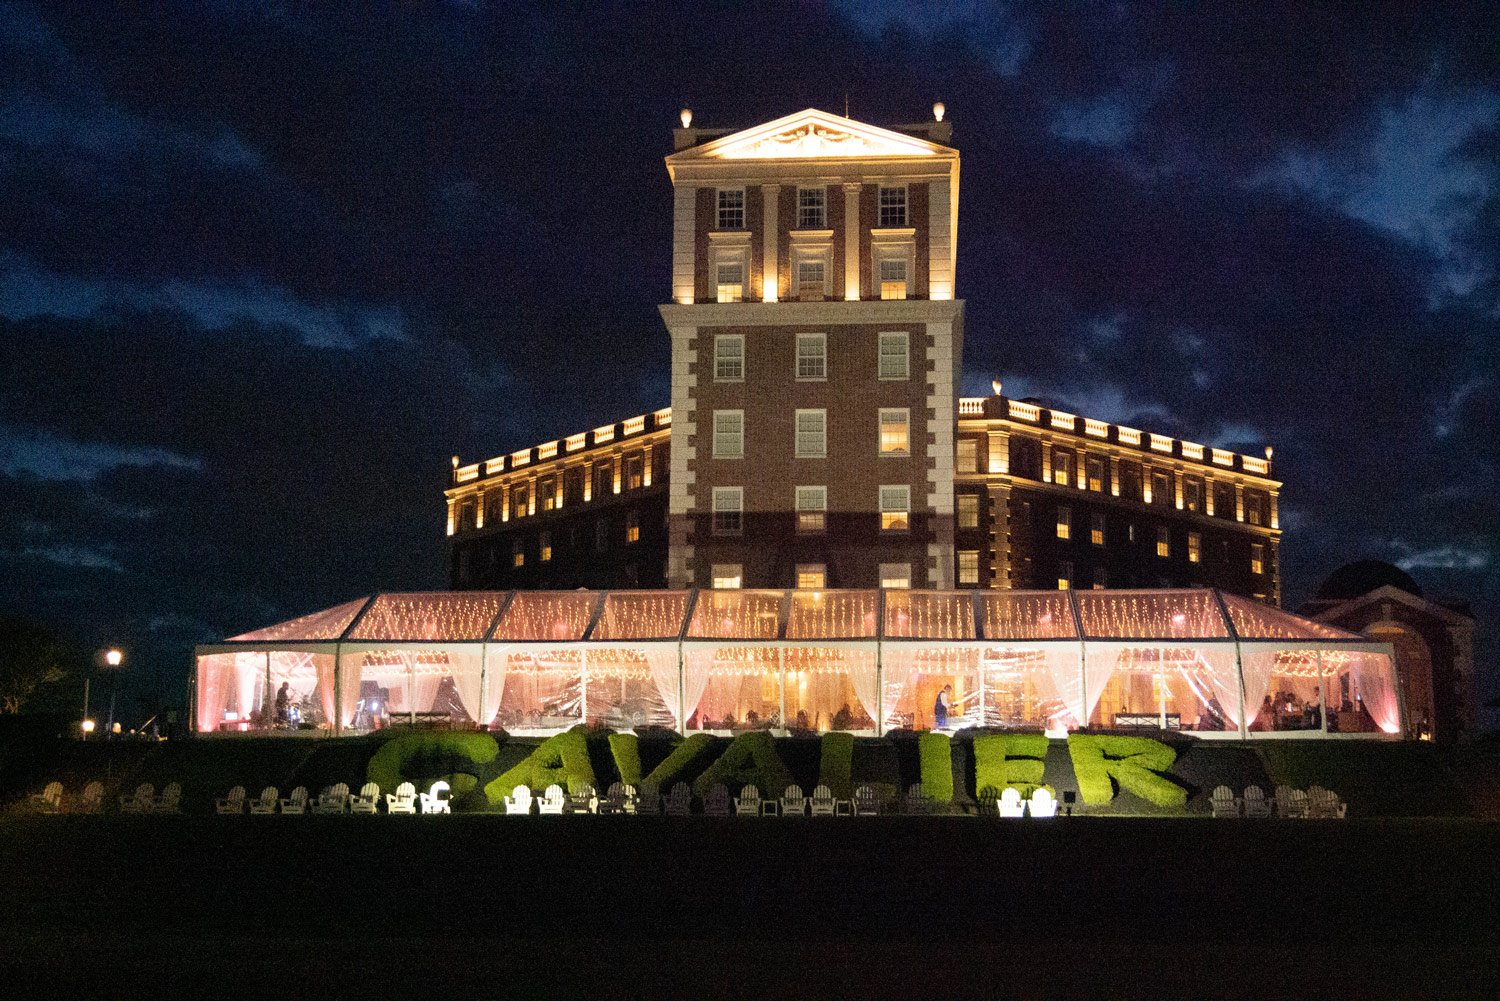 The Great Lawn of The Historic Cavalier Hotel set up for an event at night.